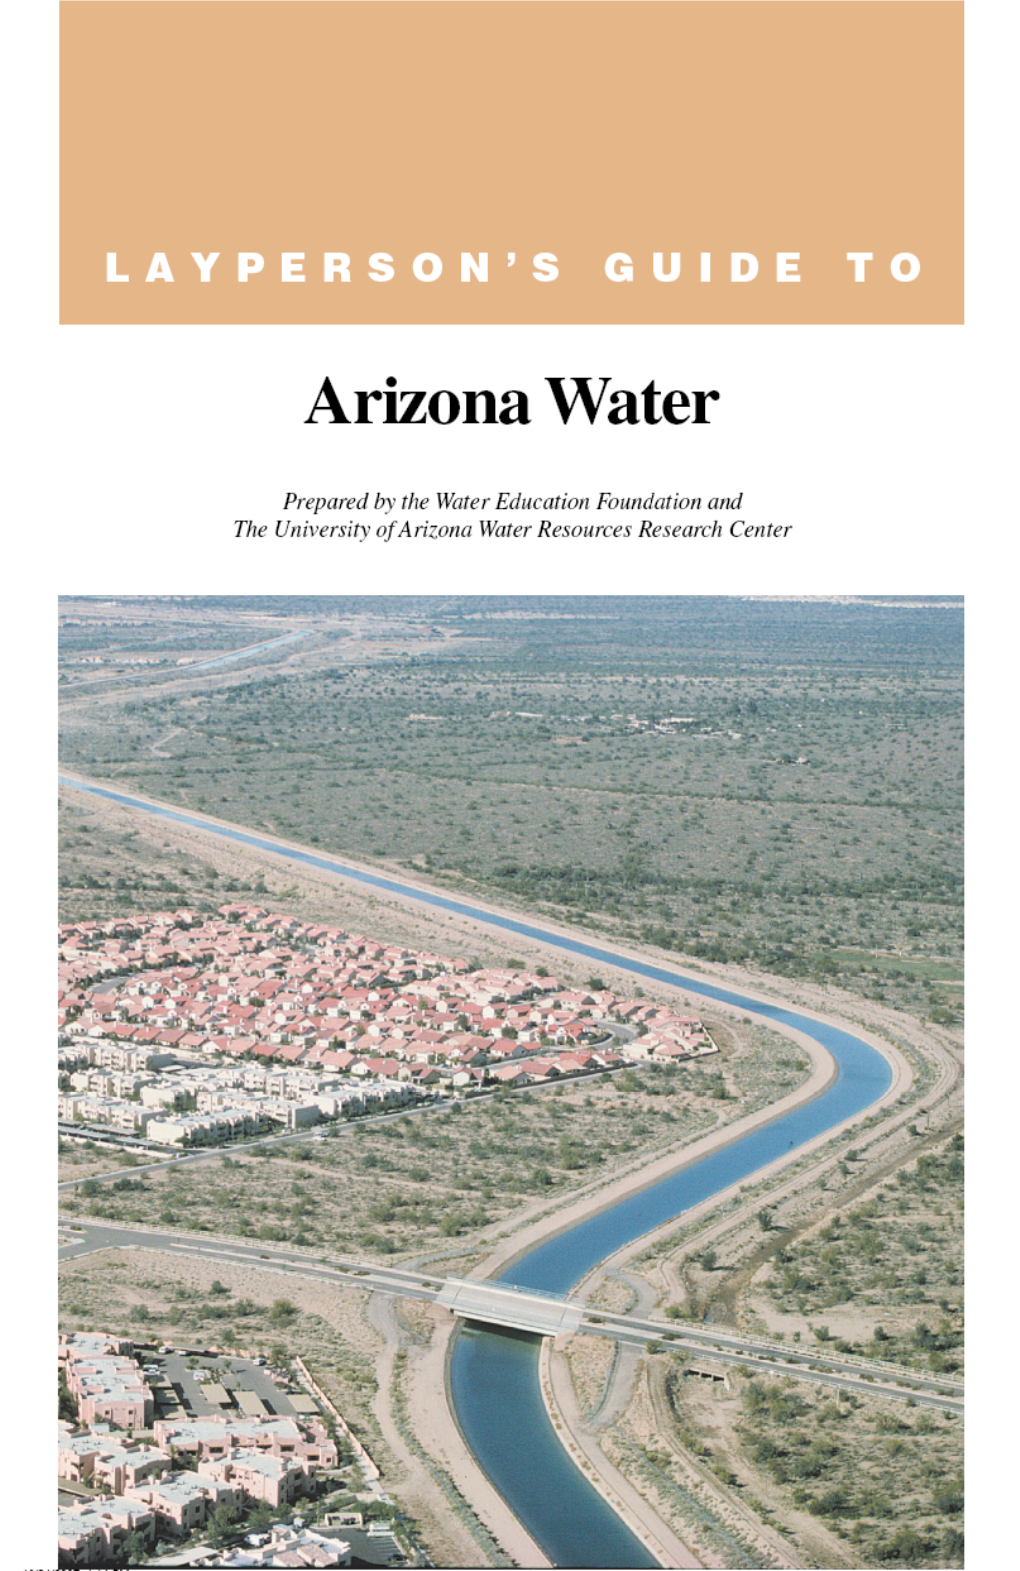 Layperson's Guide to Arizona Water